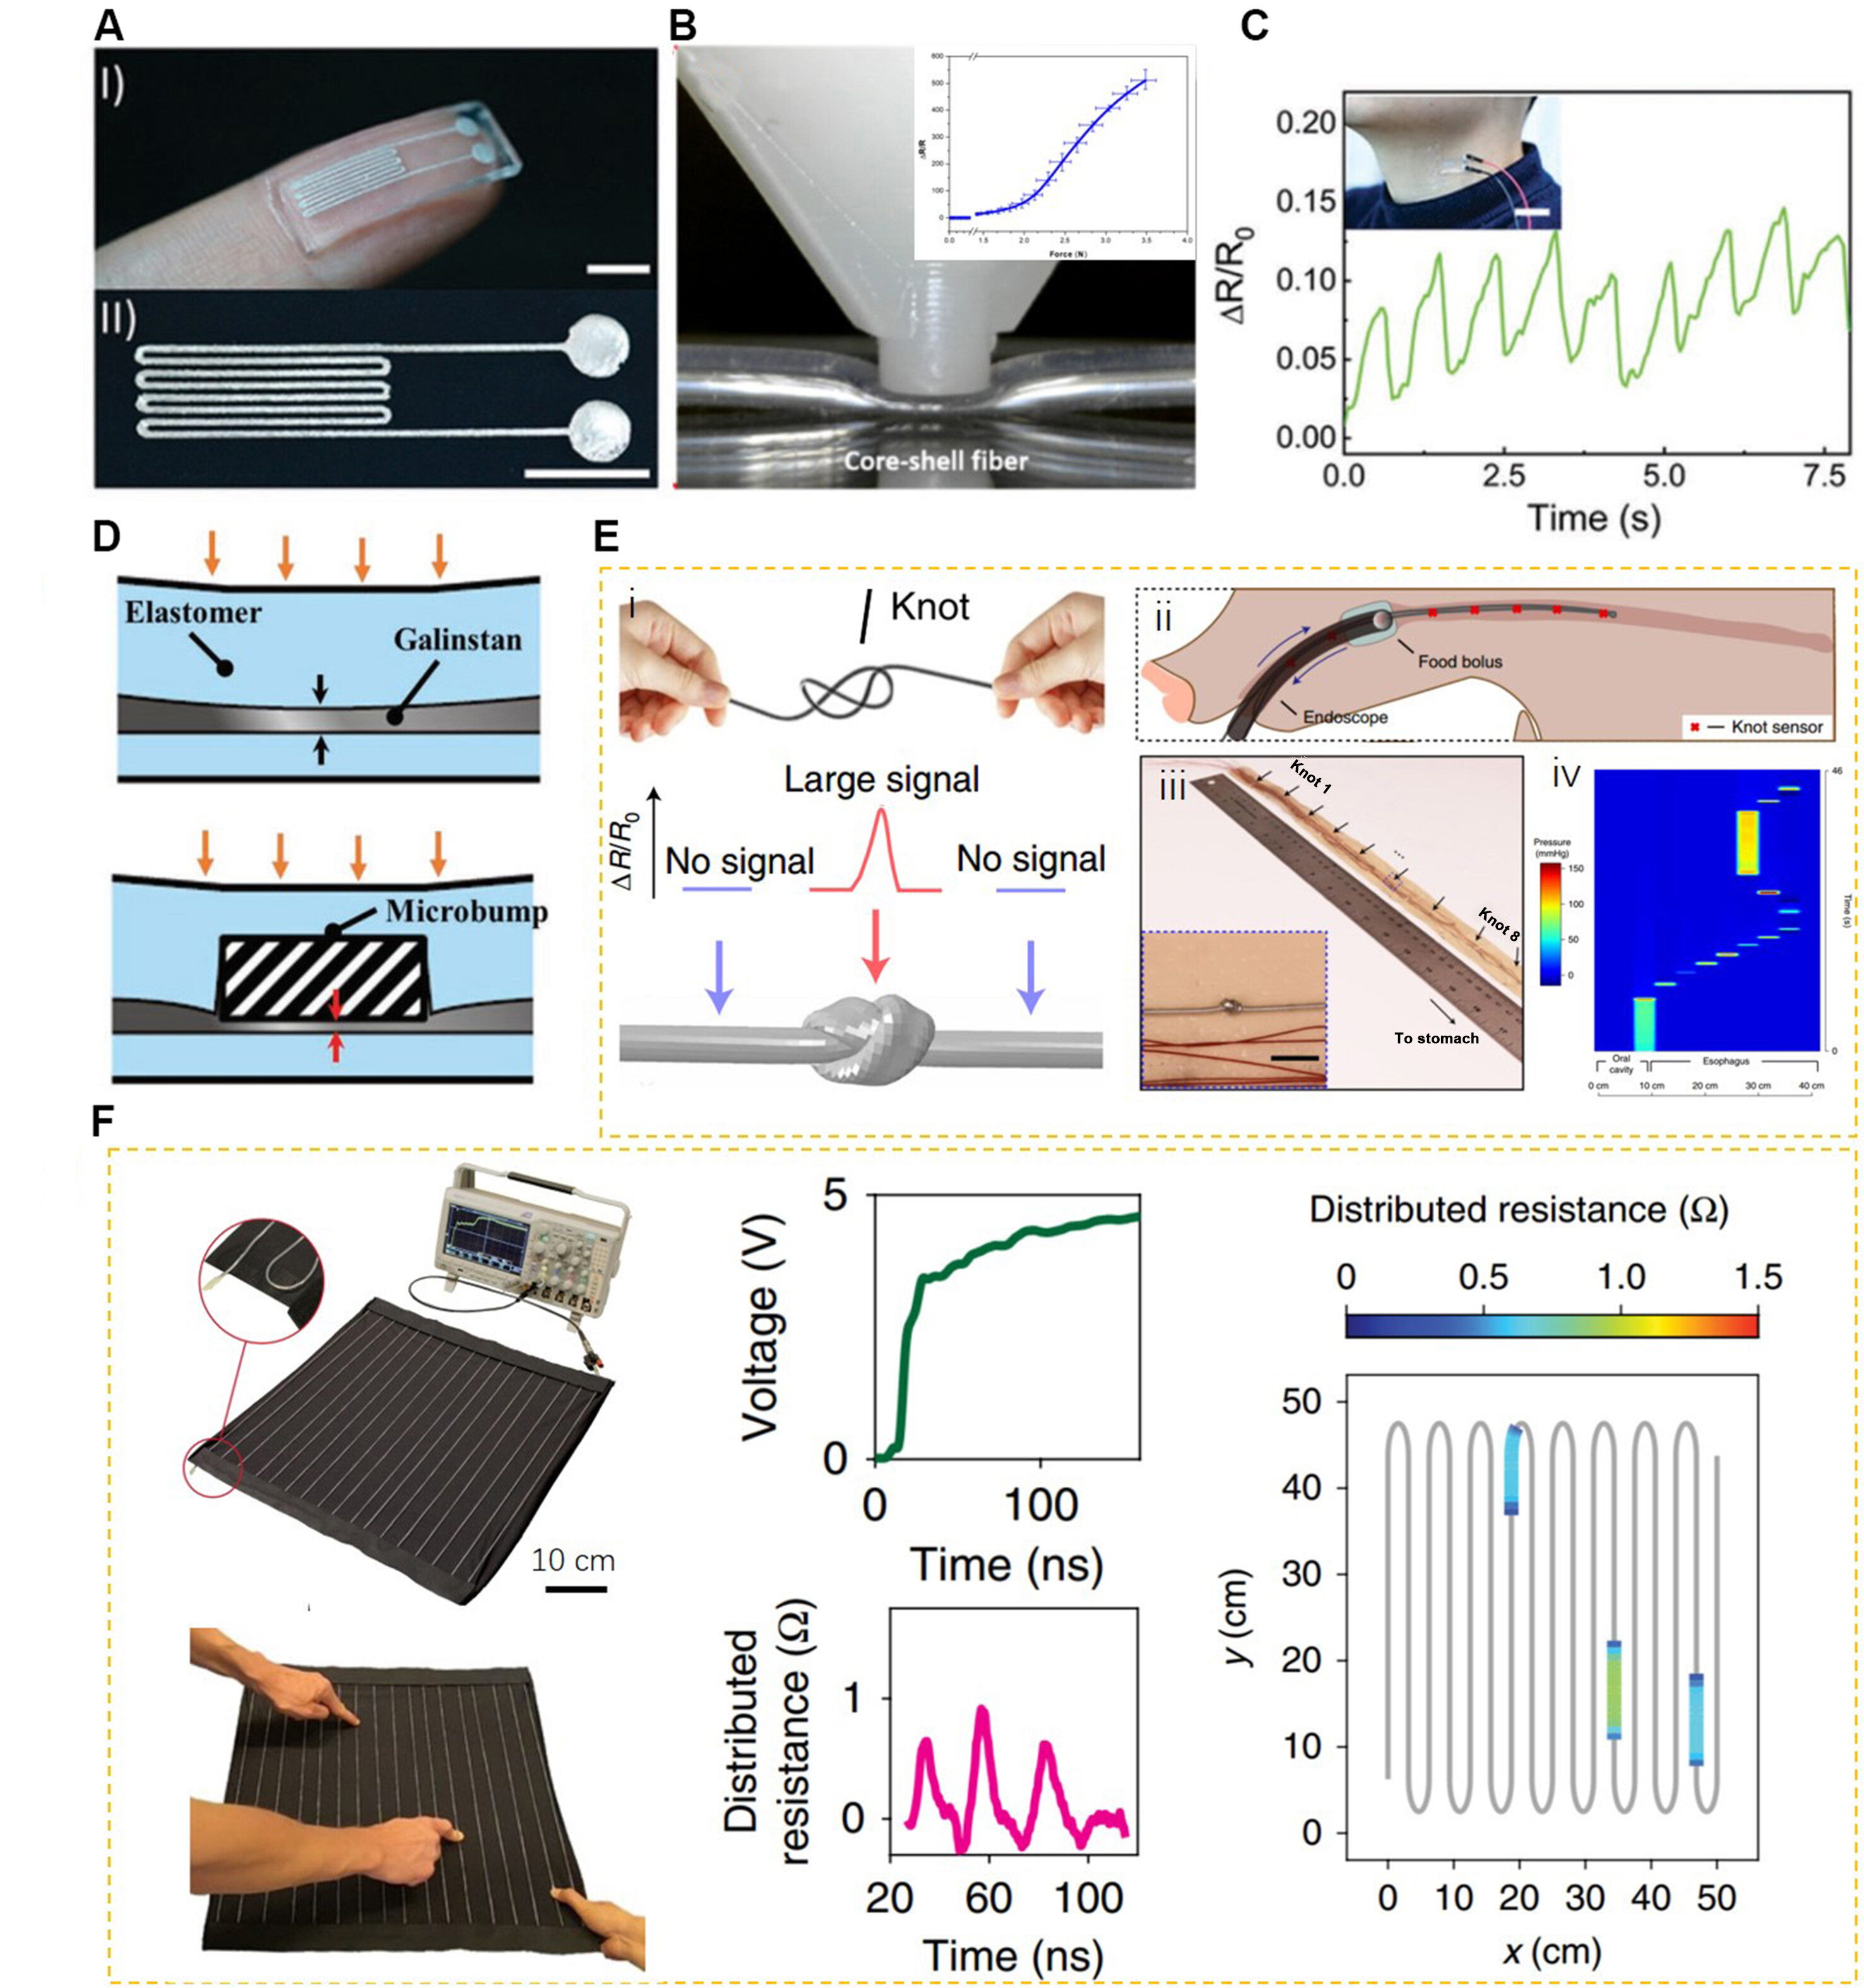 Recent advancements in liquid metal enabled flexible and wearable biosensors